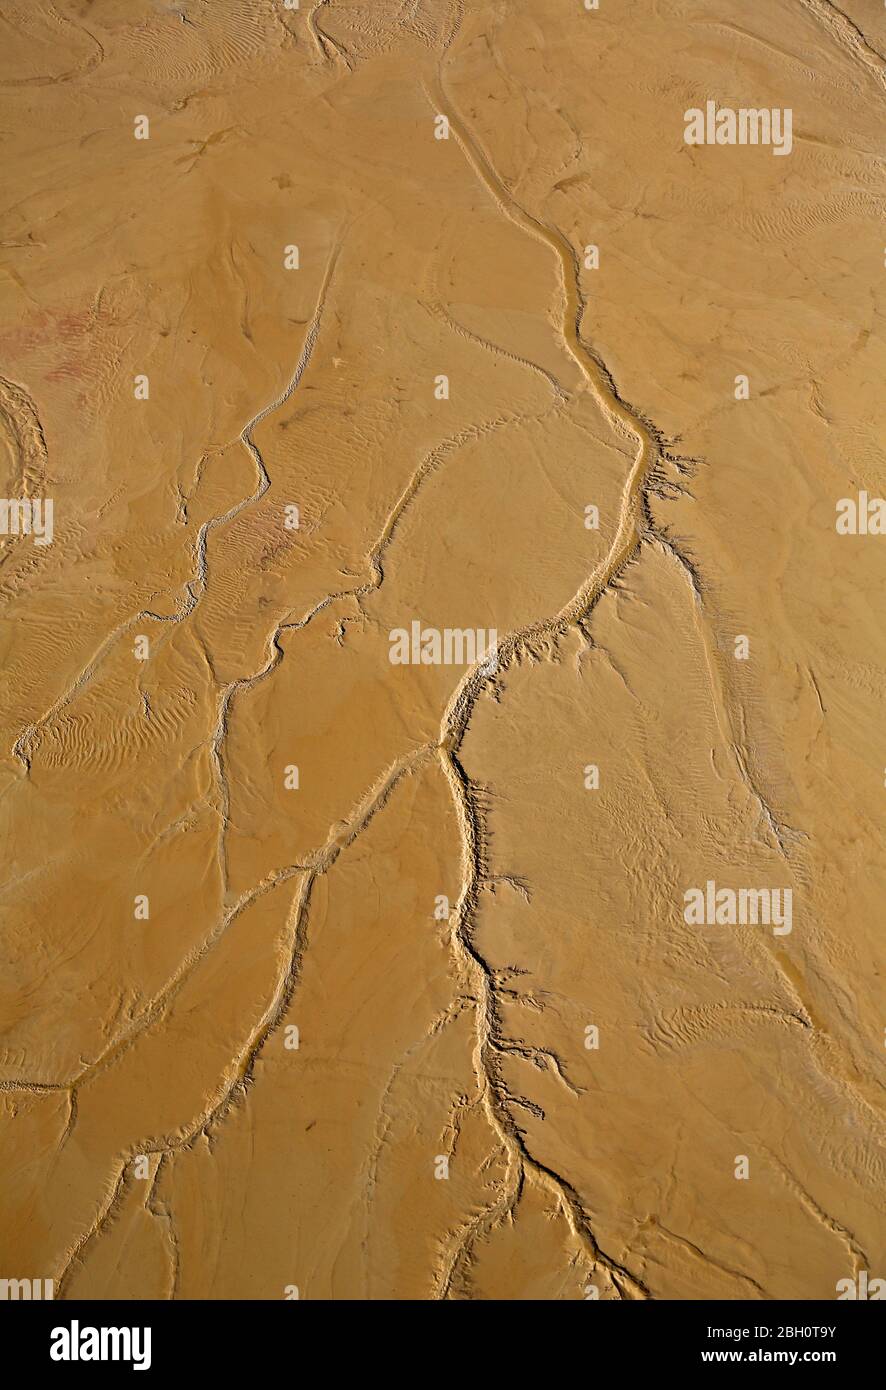 Aerial photo of a dry river bed Stock Photo